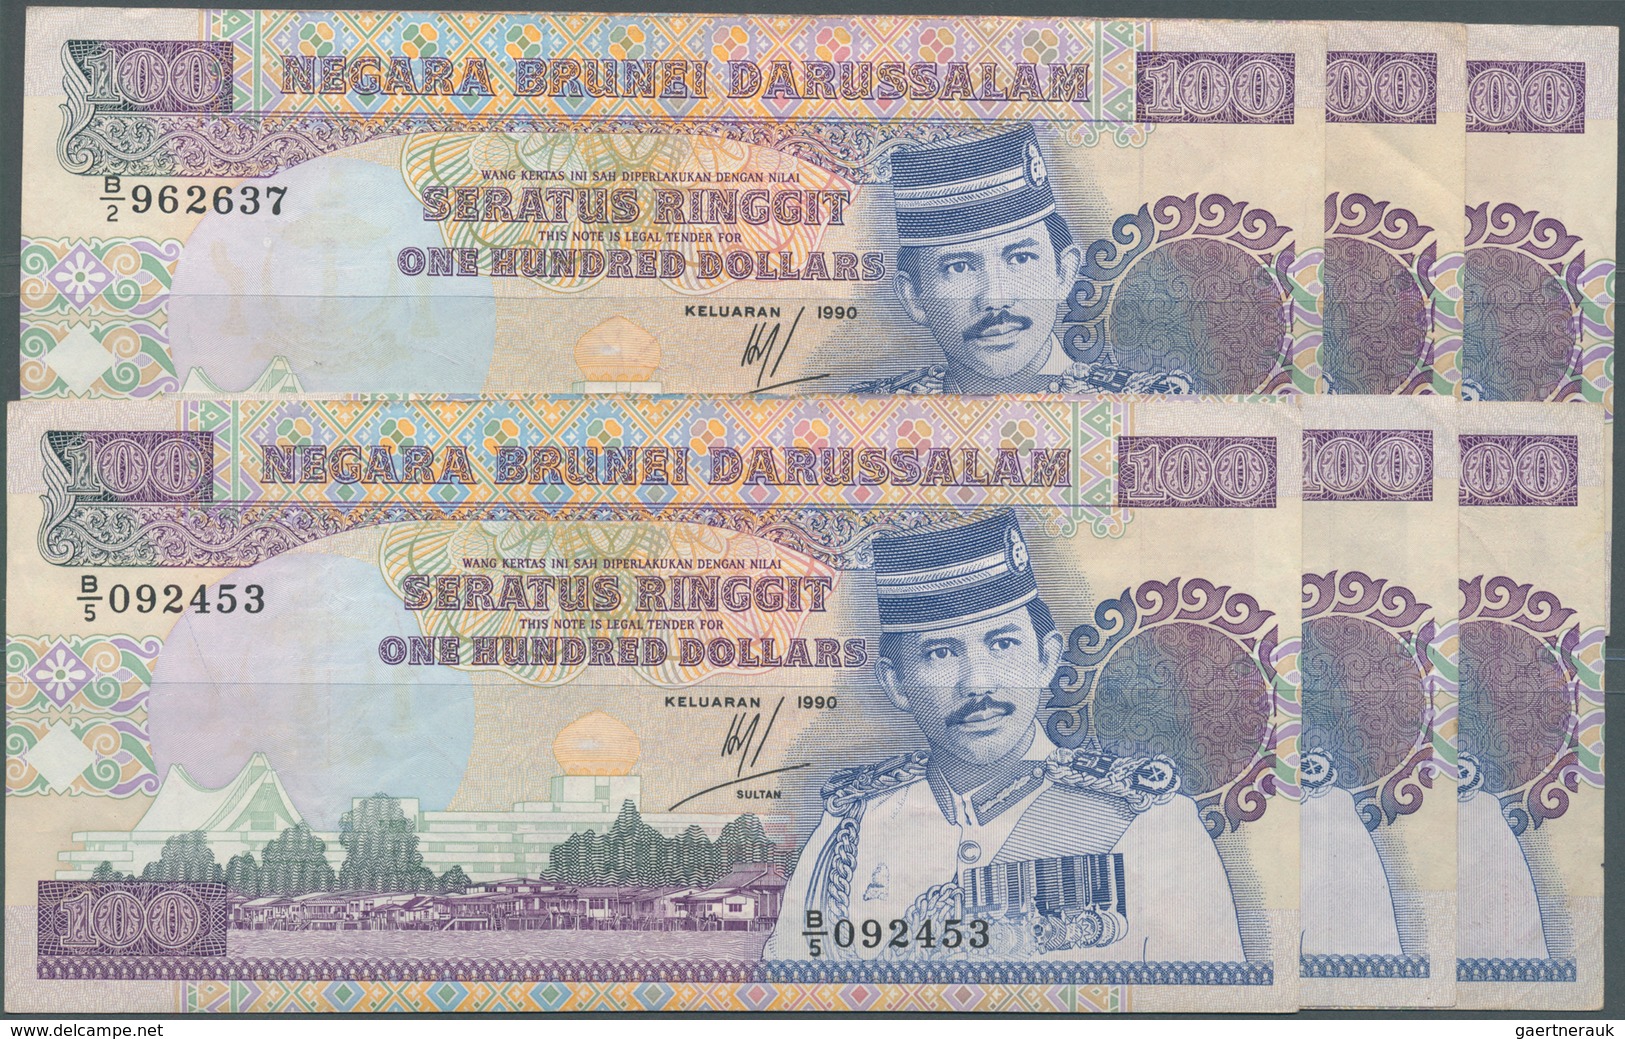 01190 Brunei: Set Of 6 Pcs 100 Ringgit 1990 P. 17, All In Similar Condition, Used With Folds And Creases B - Brunei